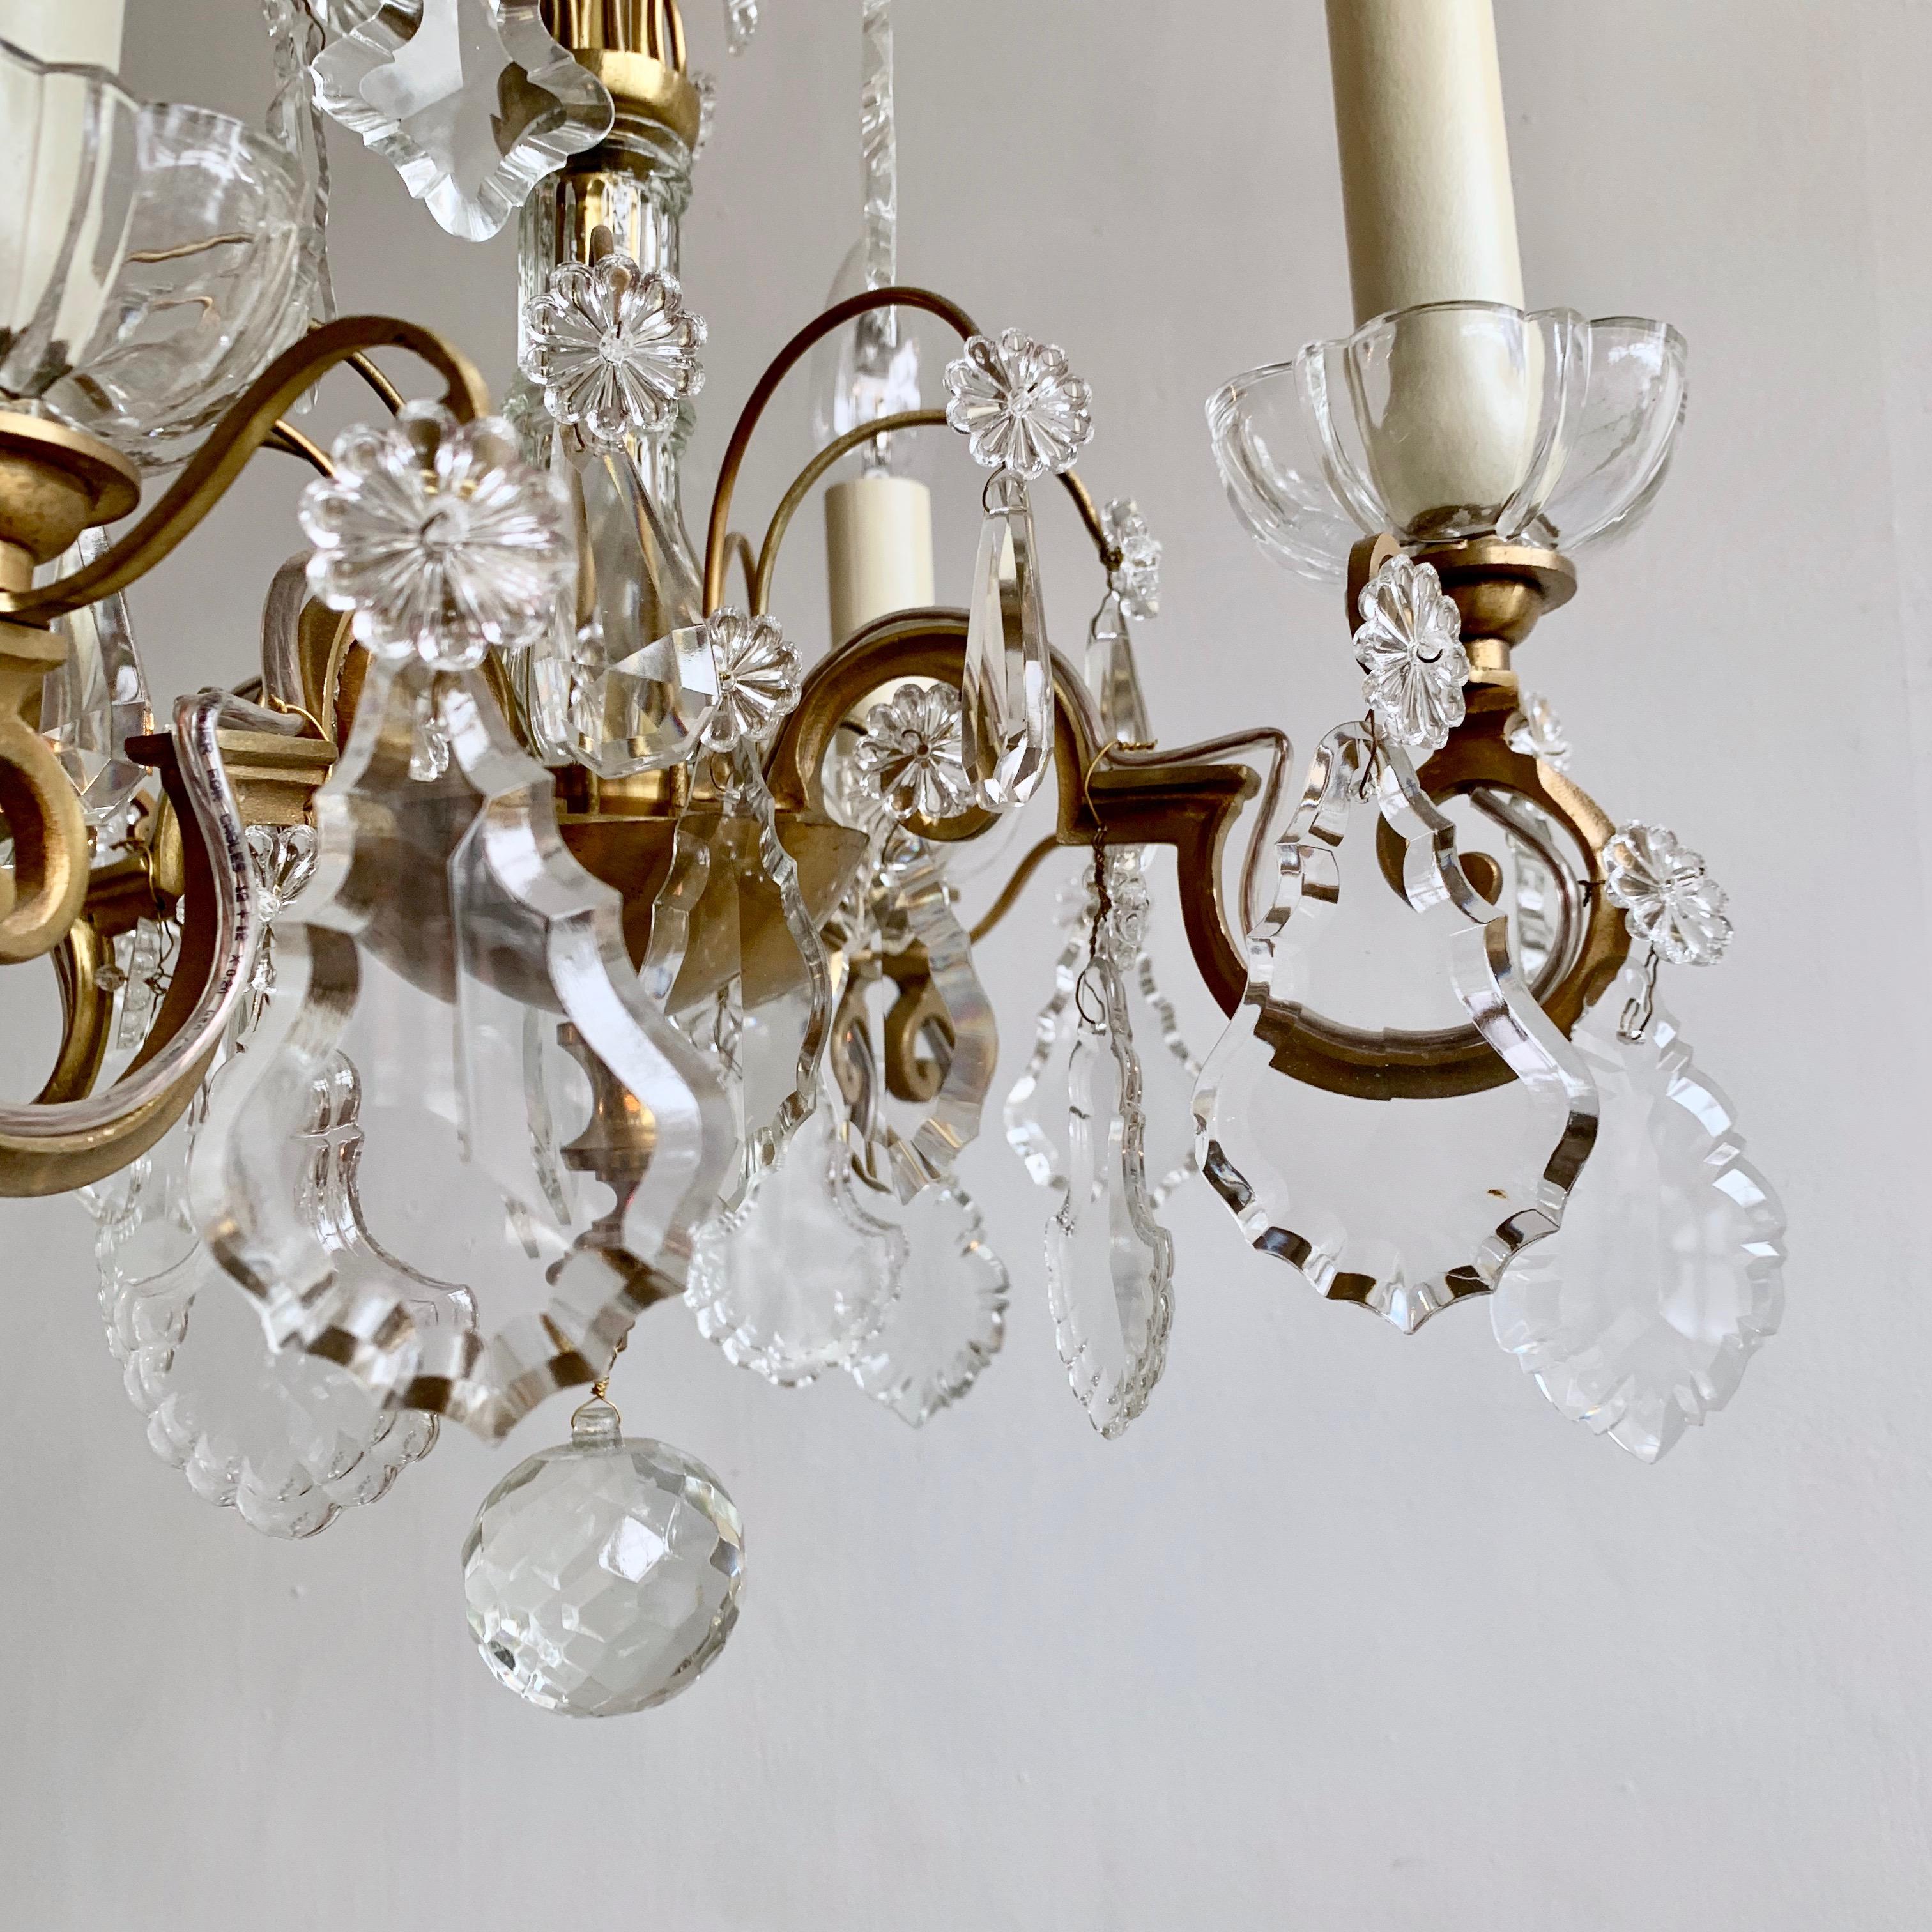 French, Brass, Louis XIV Style Chandelier with Flat Leaf Drops (Frühes 20. Jahrhundert) im Angebot